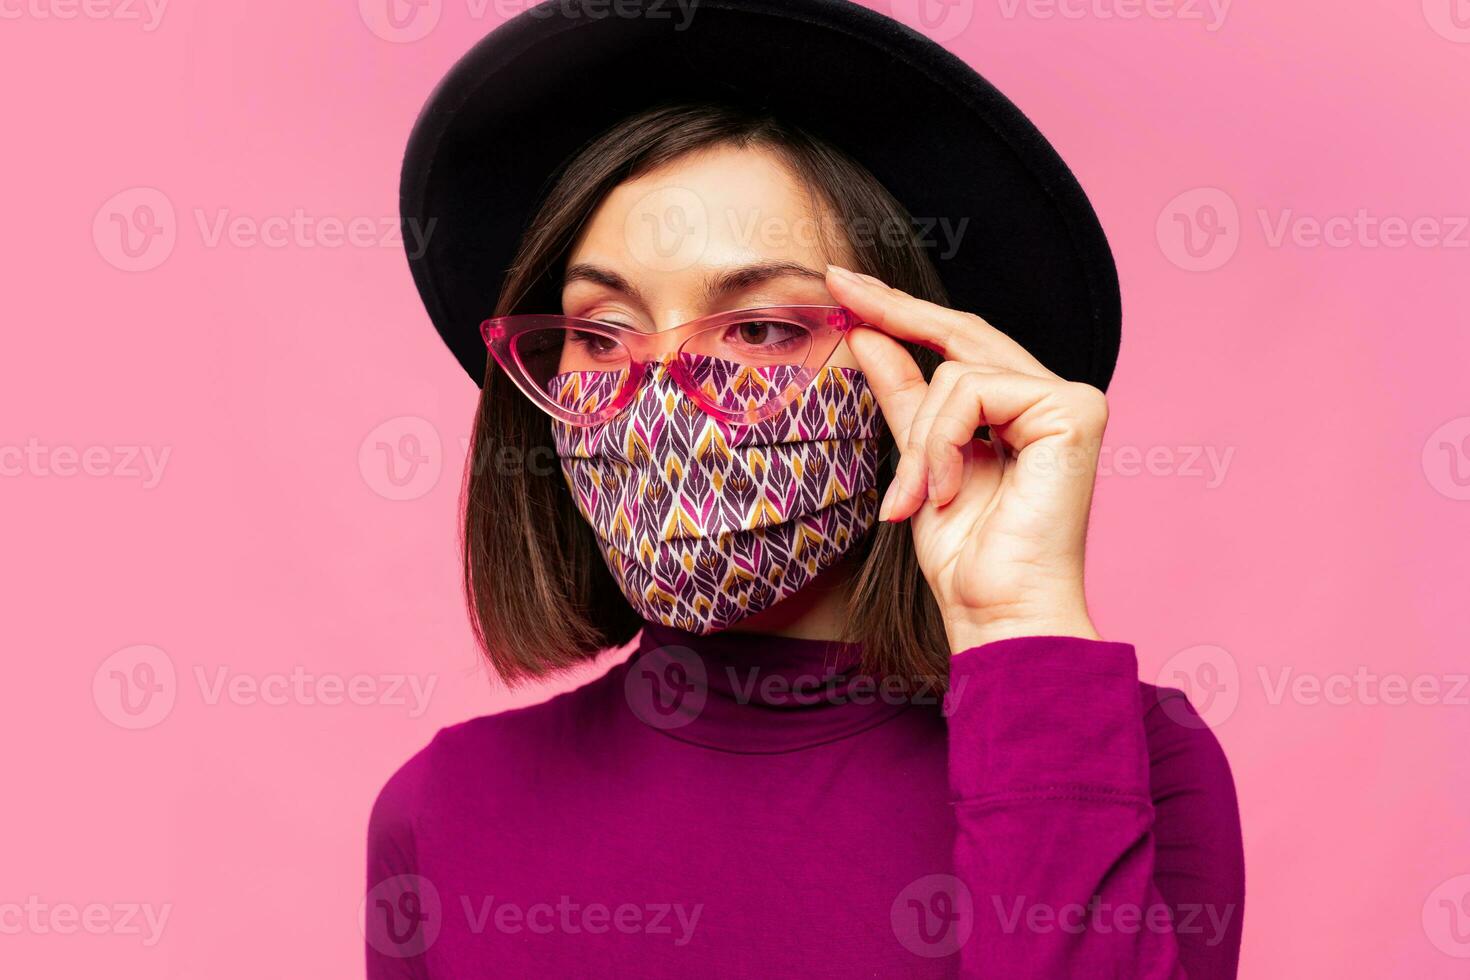 European model dressed protective stylish face mask. Wearing black hat and sunglasses. Posing over pink background in studio. photo